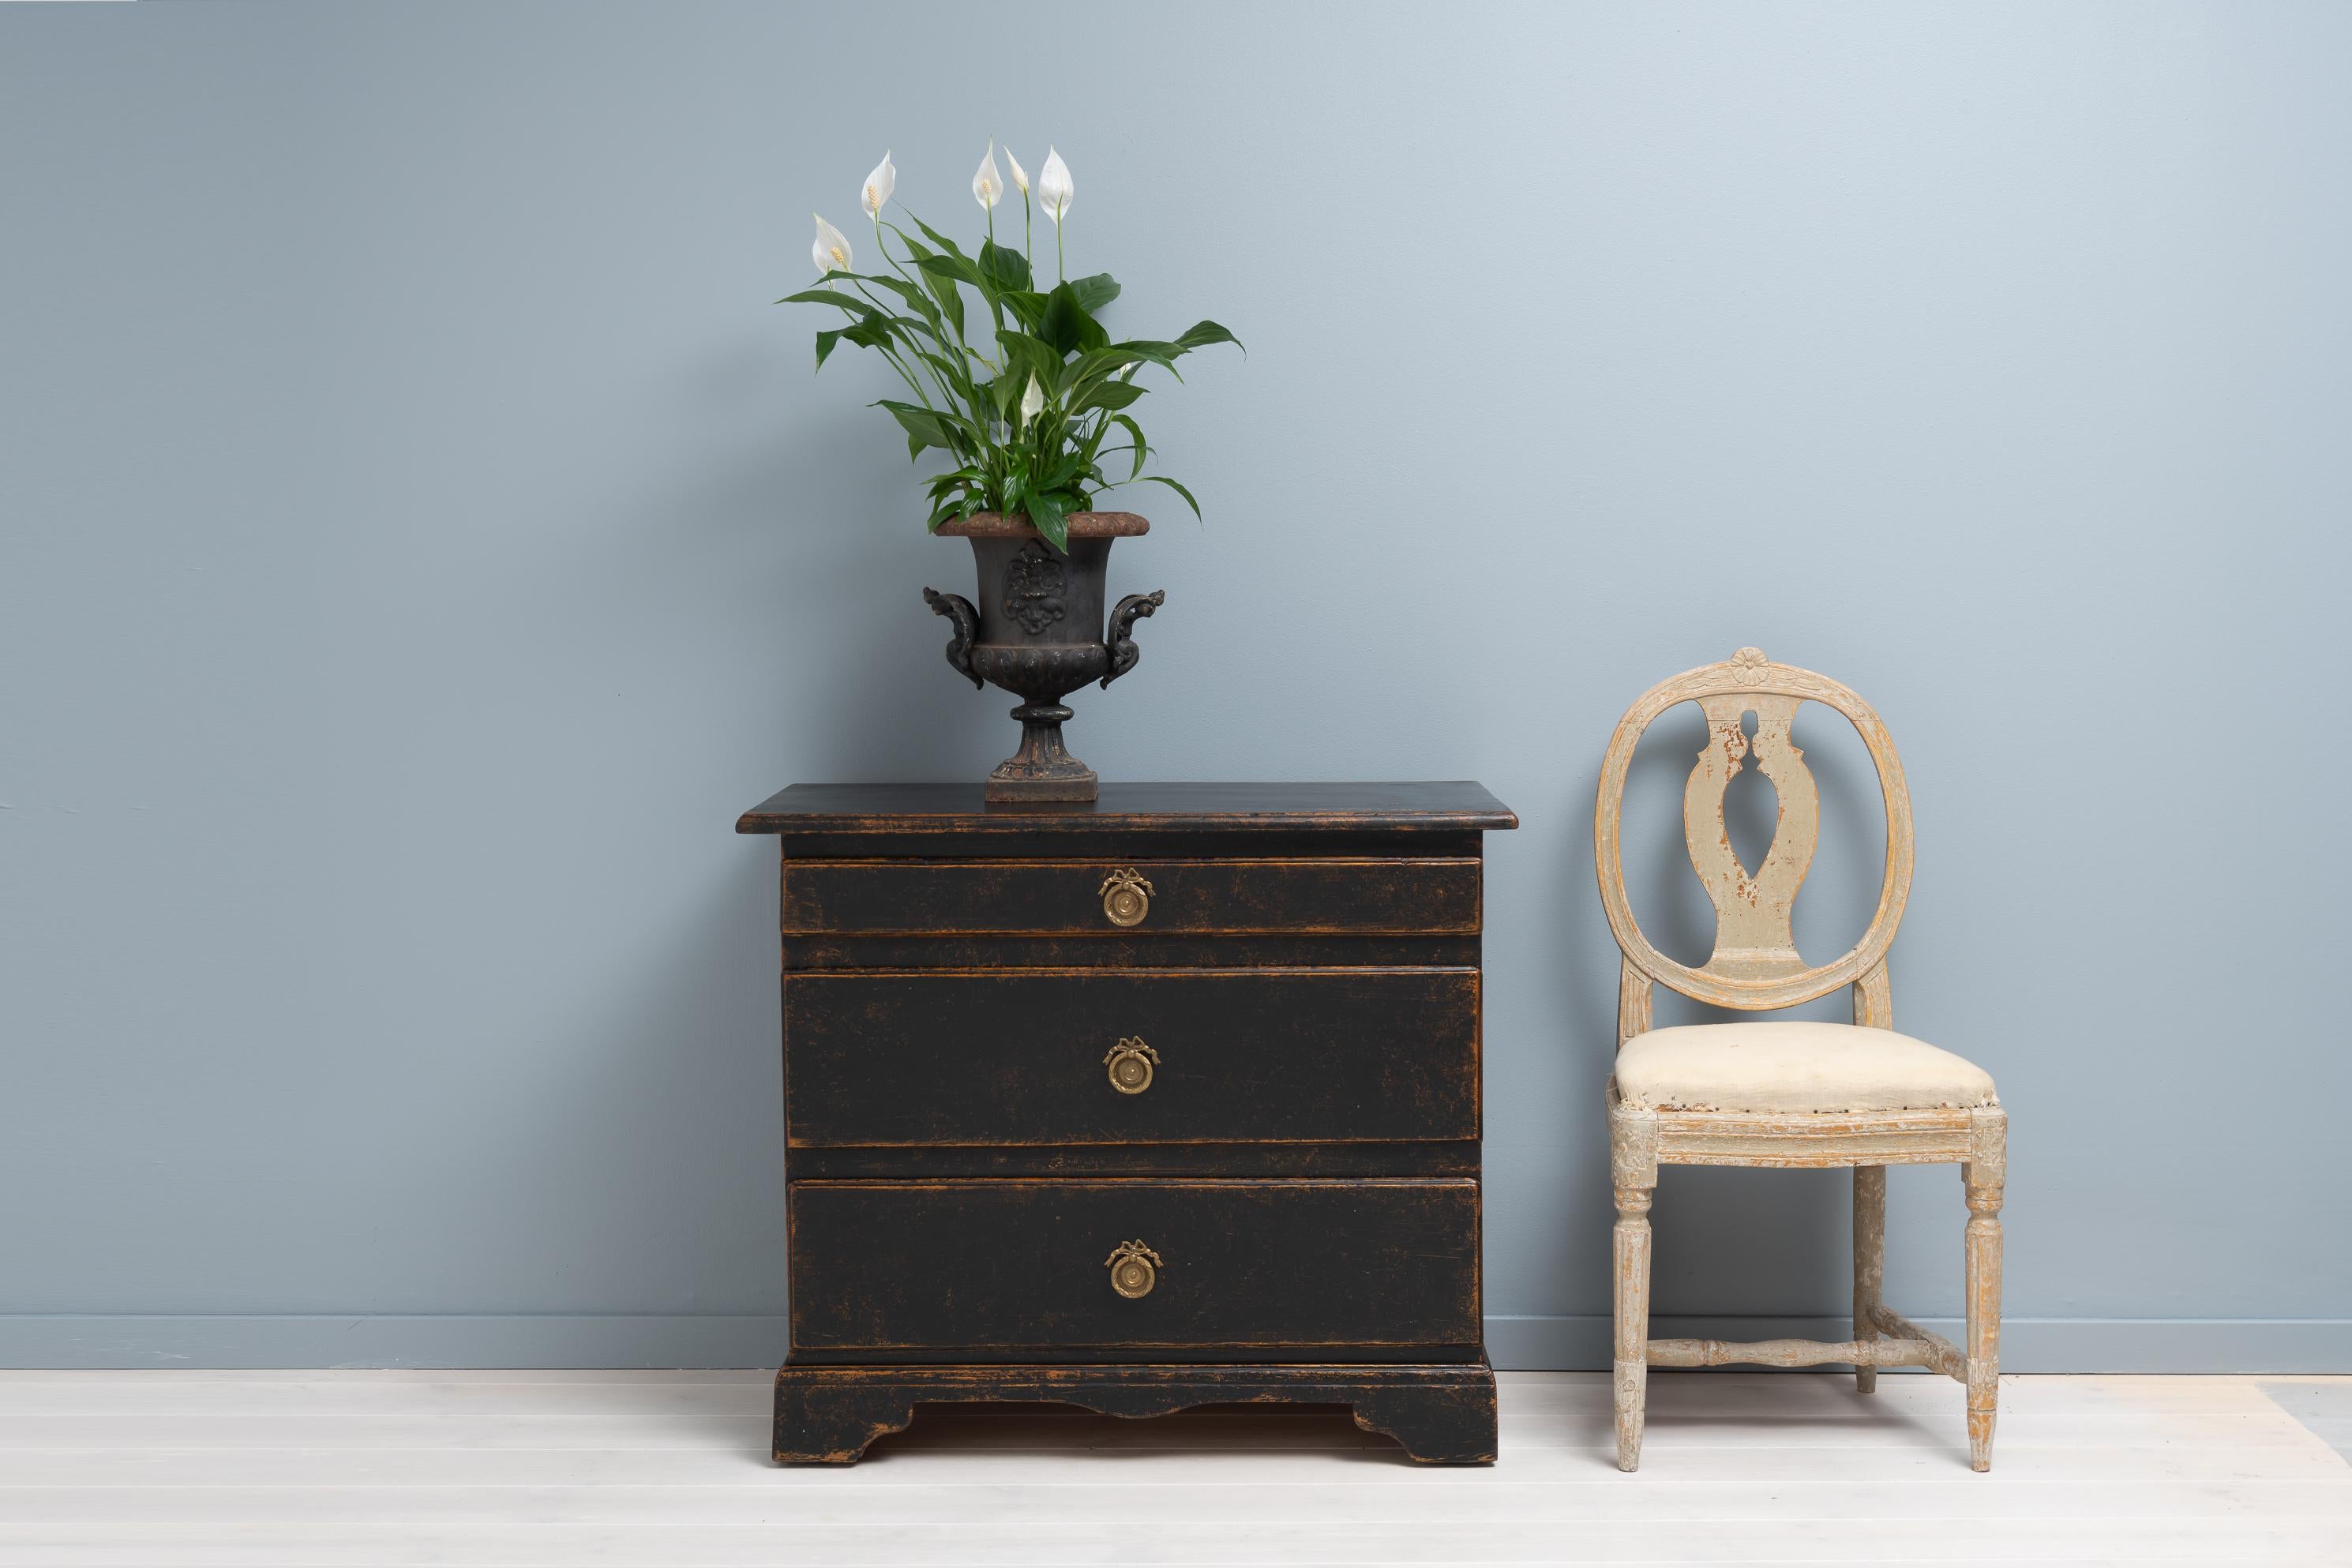 Small black Swedish baroque chest of drawers from the late 1700s. The chest is painted pine with patina and distress that emphasises the shapes and contours of the chest. It has three drawers with the top one being smaller. The chest is on the